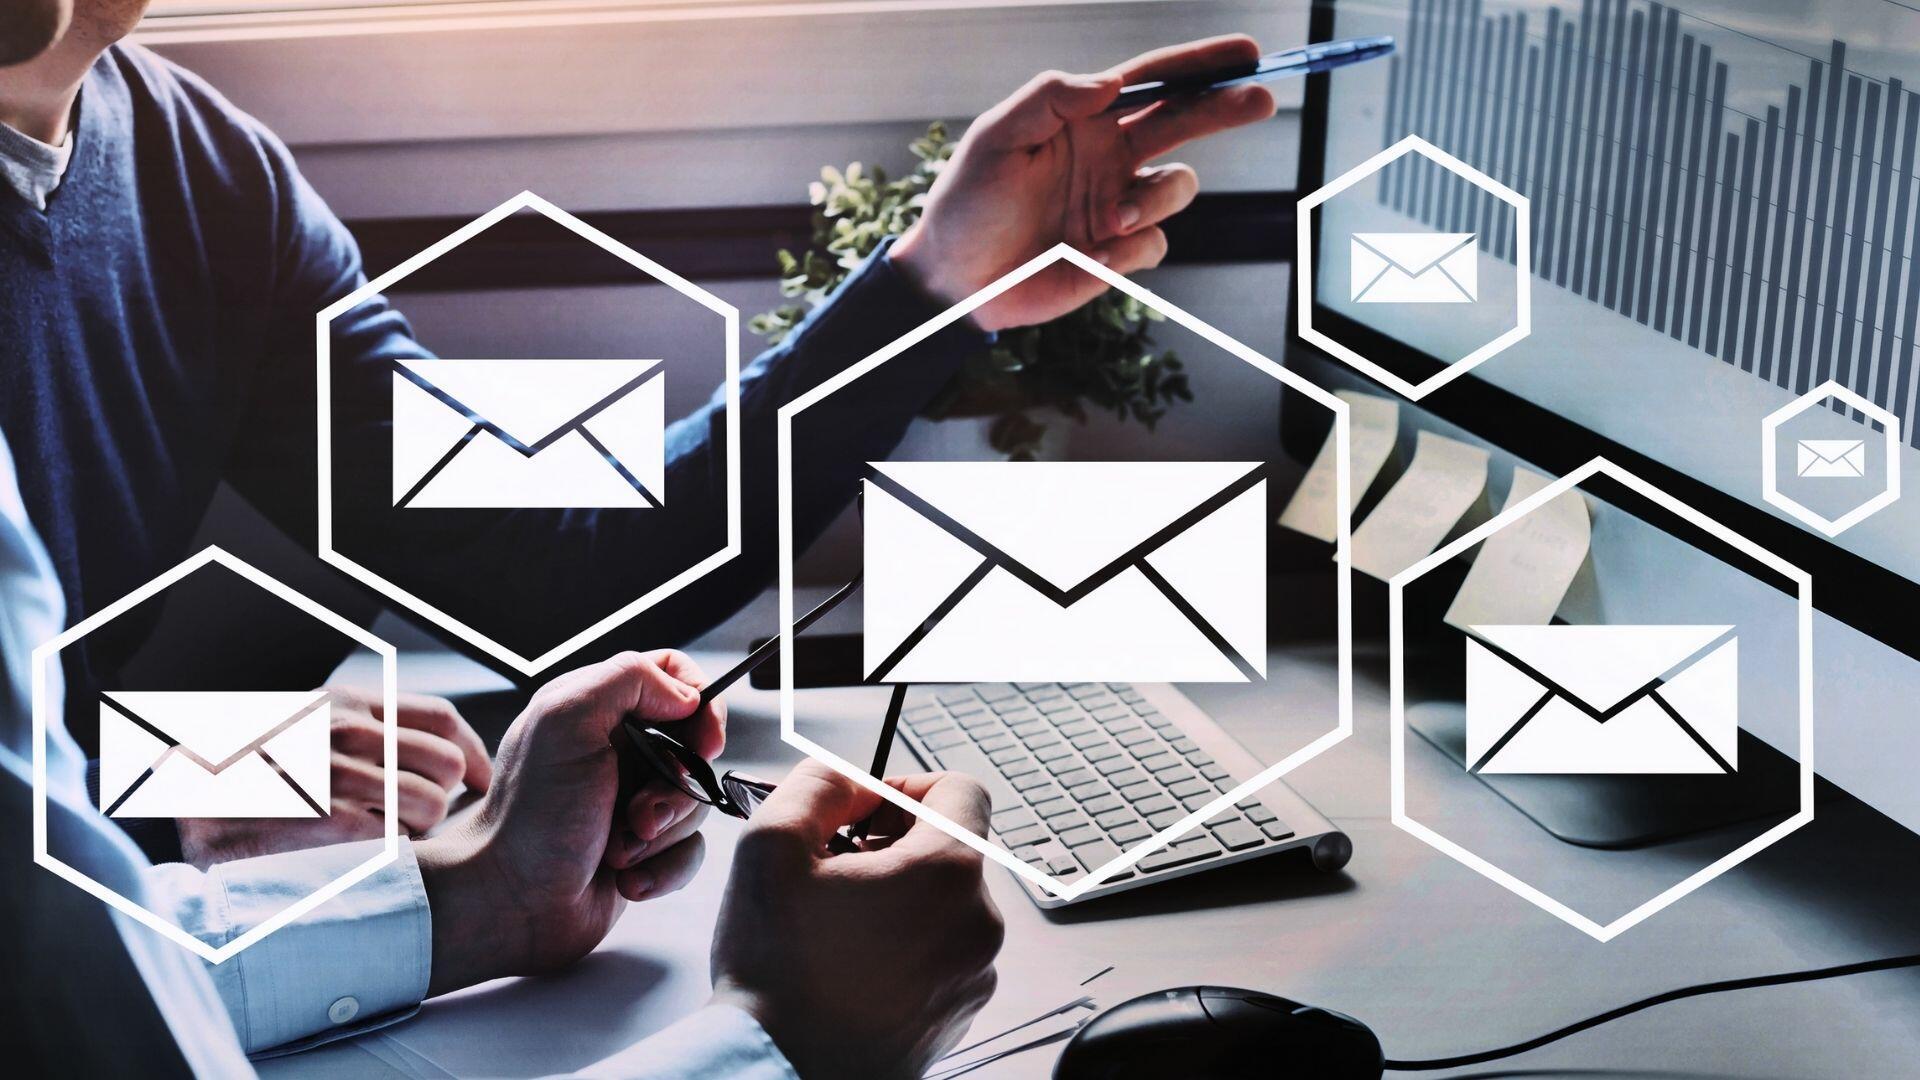 Risks from not controlling business emails when sent